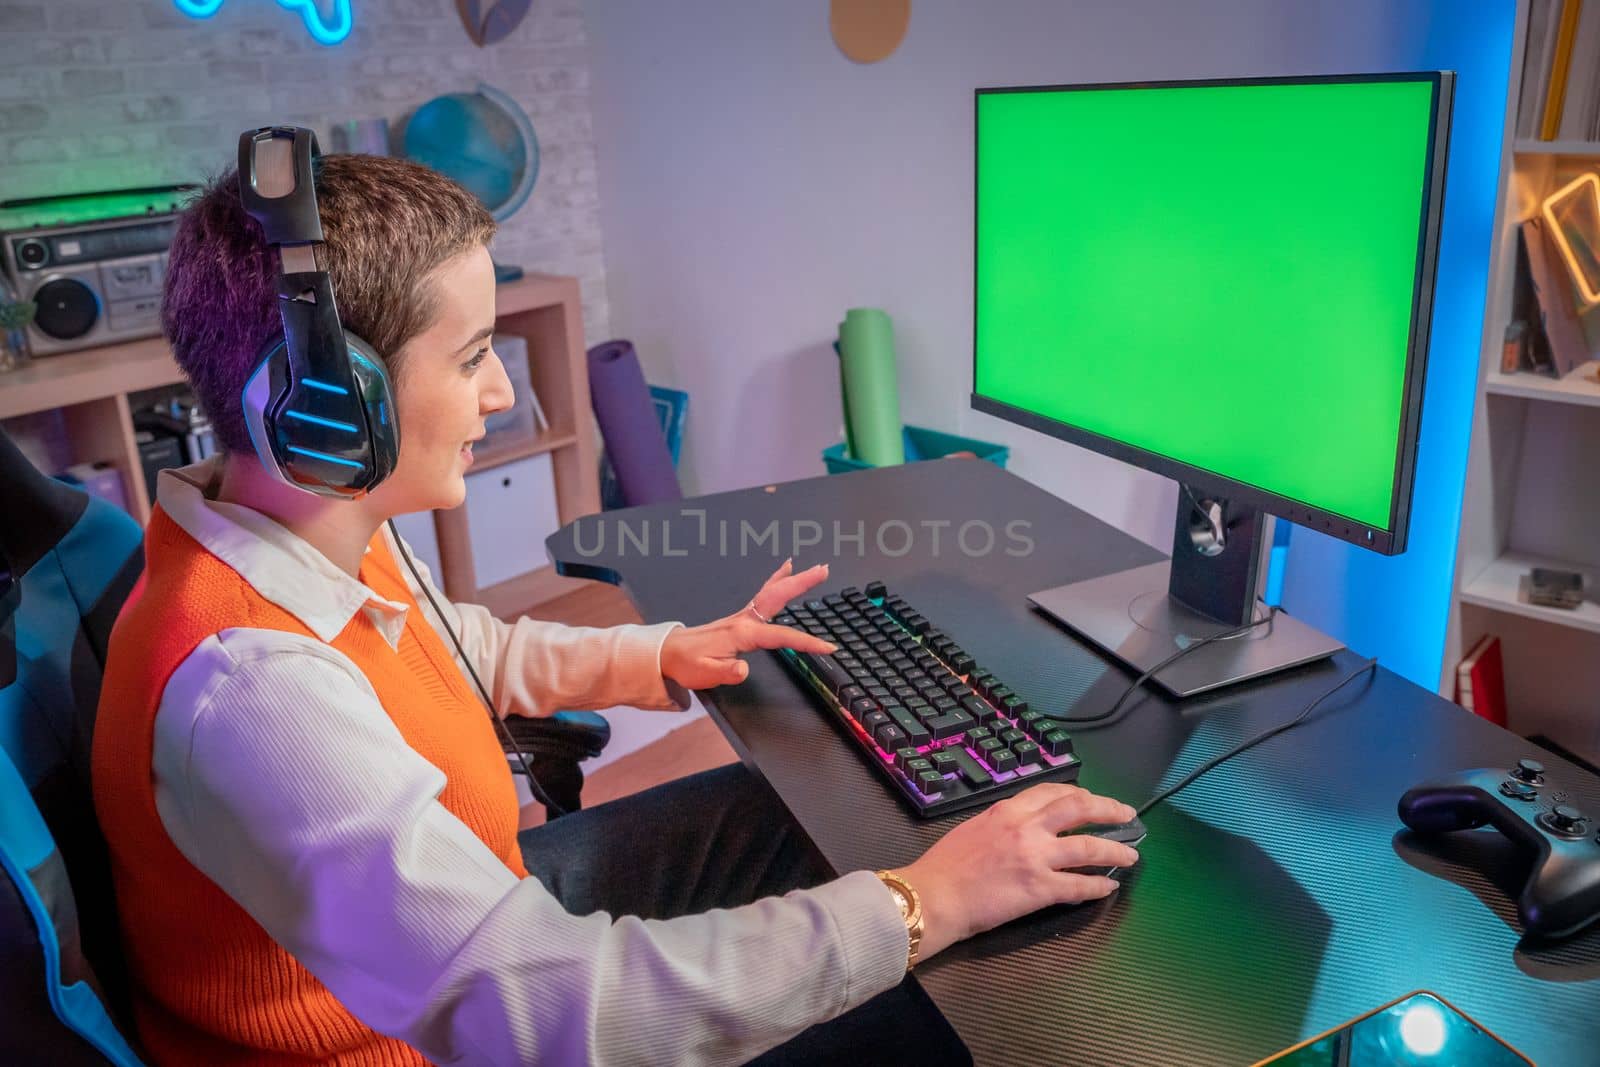 Pro gamer girl streaming video games with green screen mockup display in gaming home studio. Player using professional computer wearing headset in neon light room. High quality photo